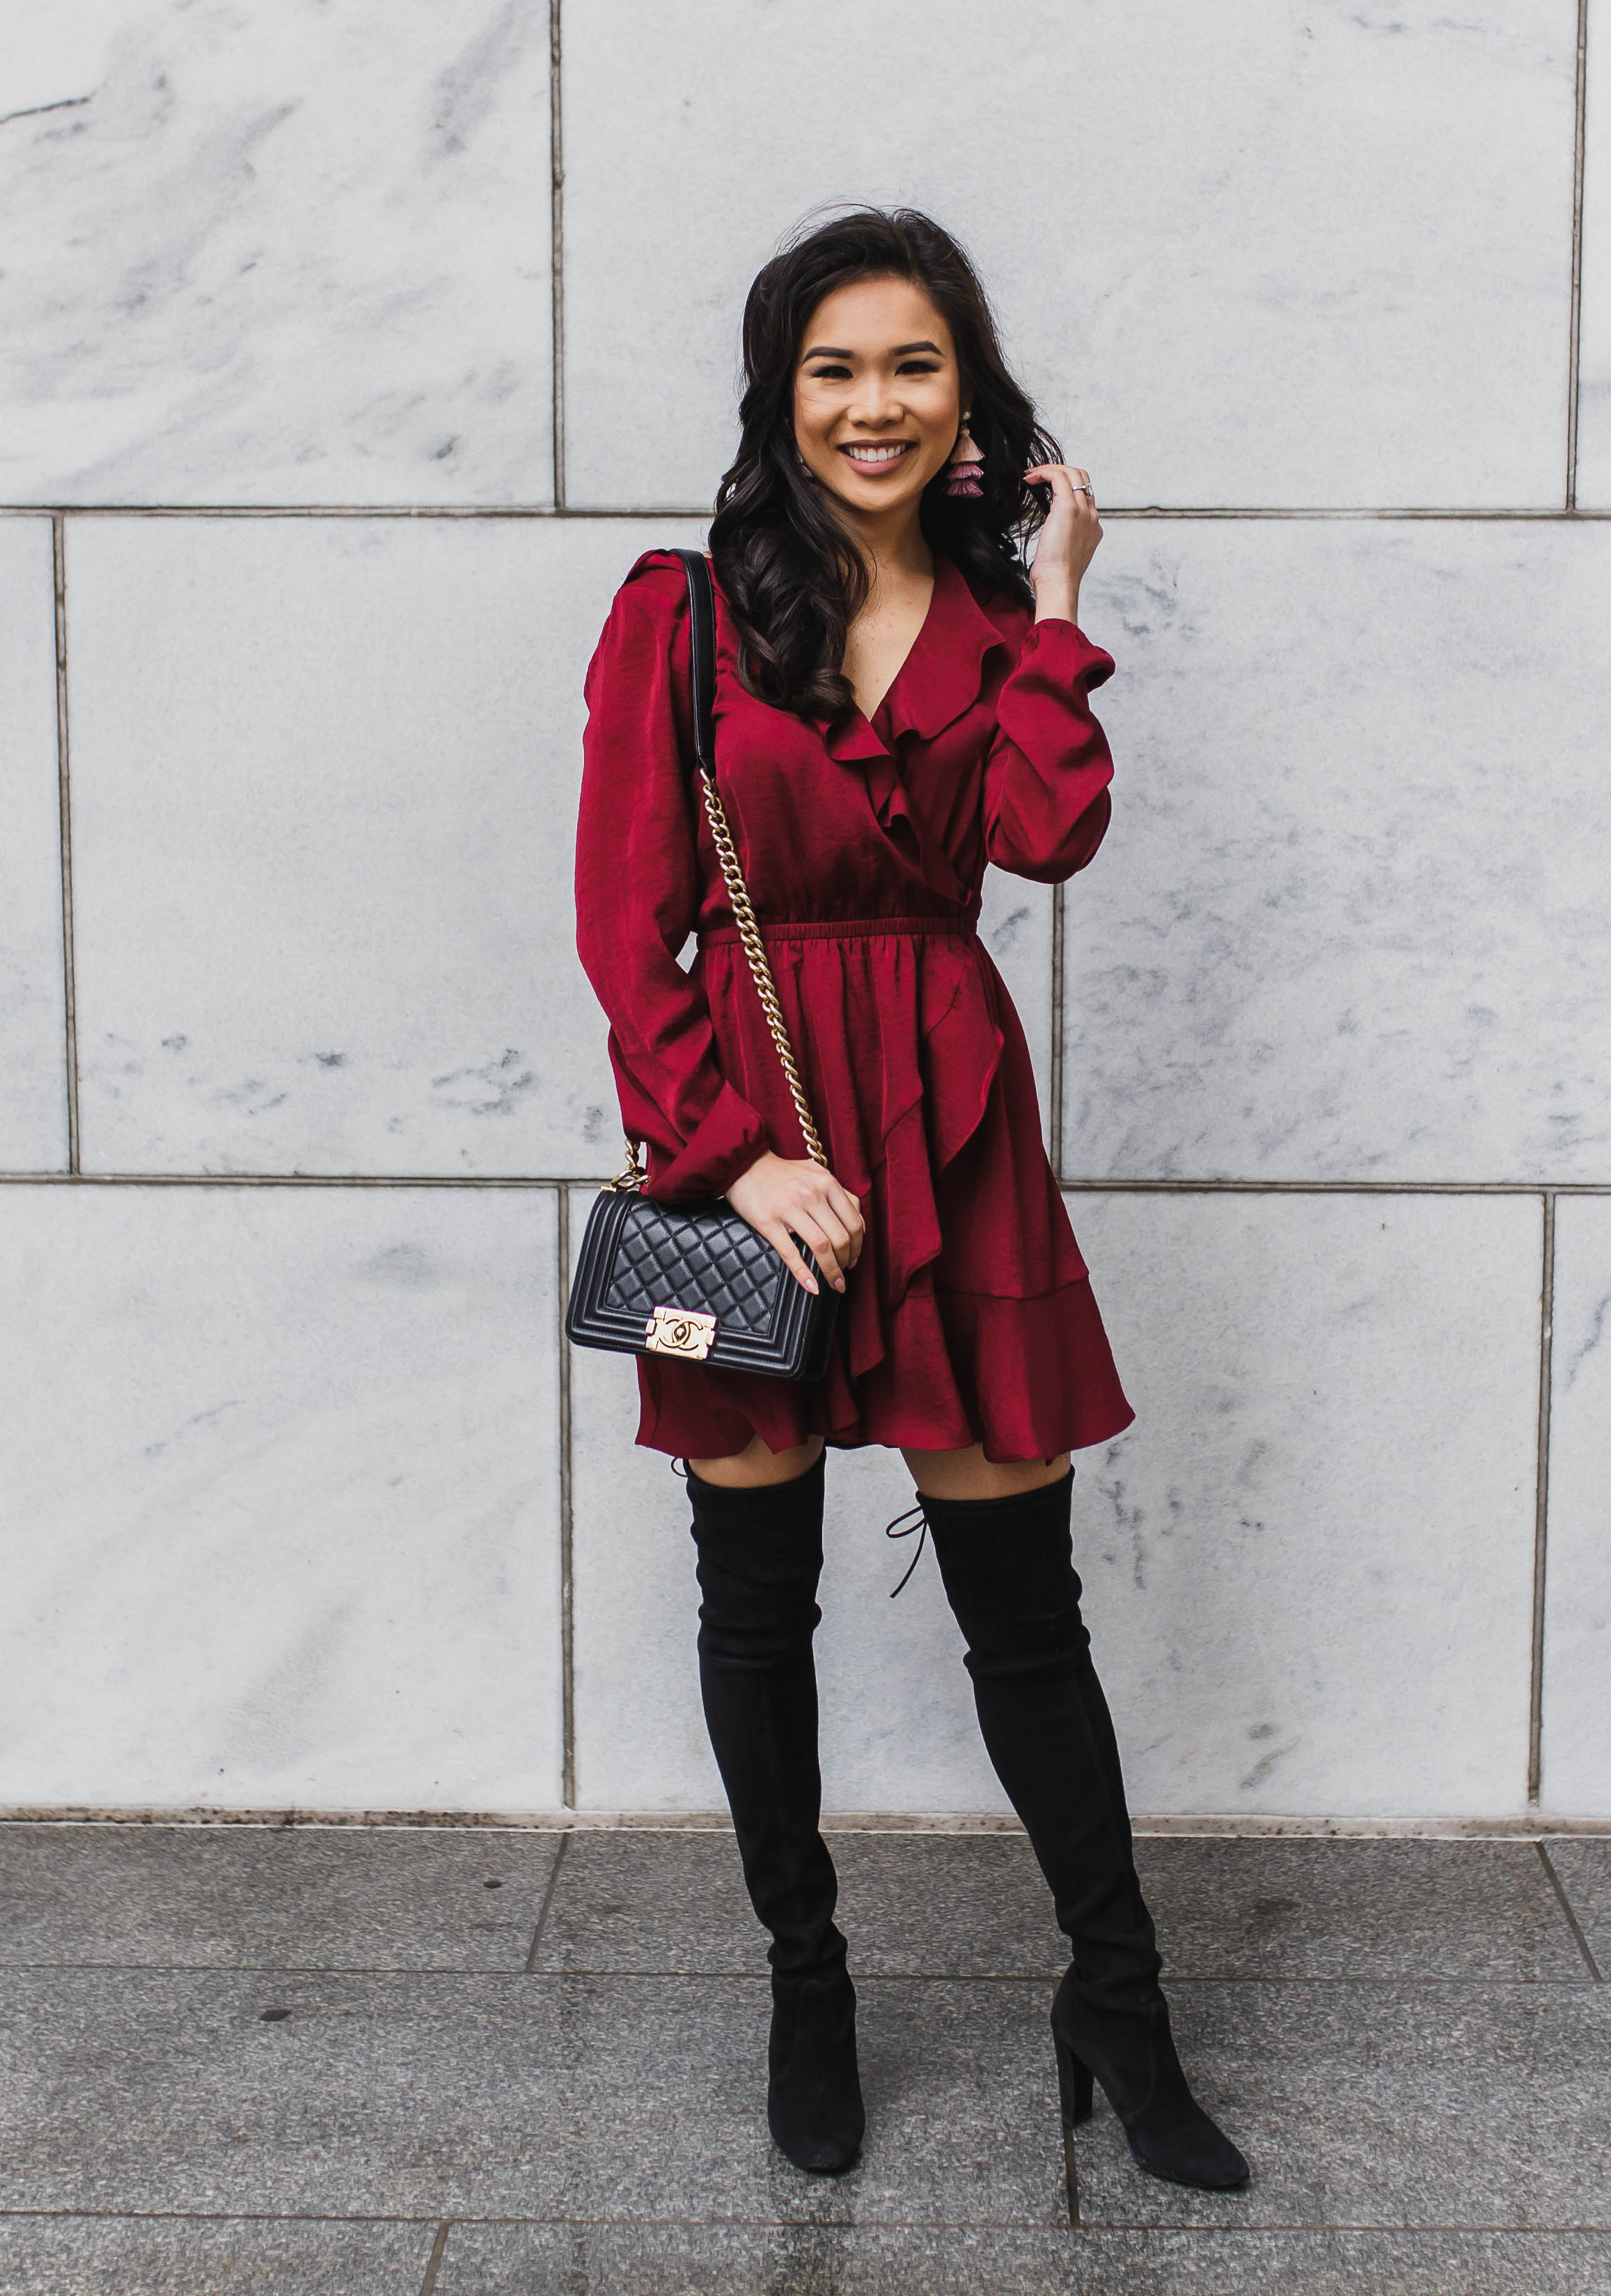 Red Ruffle Dress with over the knee boots and Chanel bag